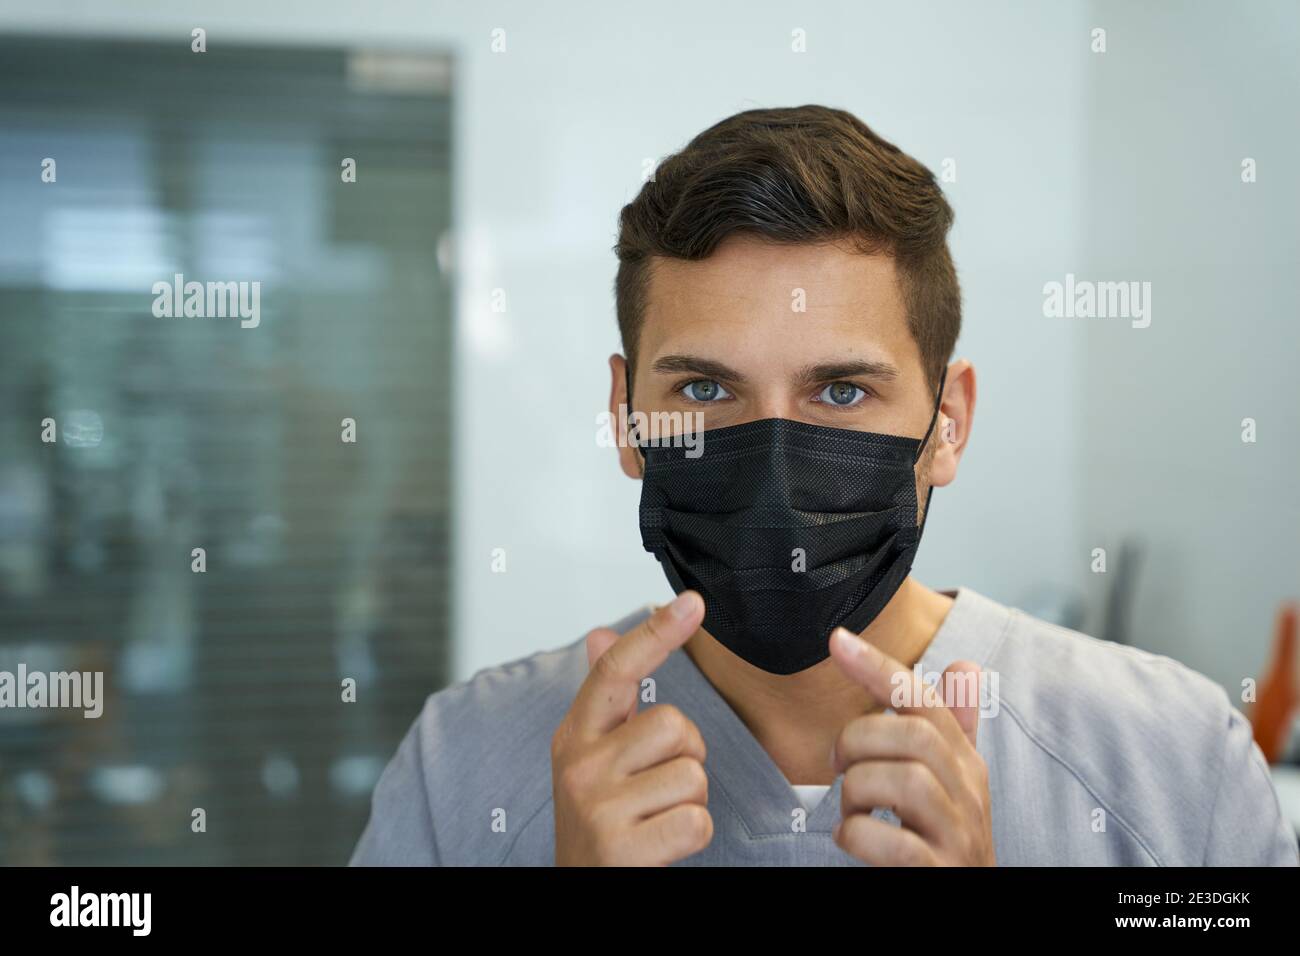 Mindful doctor showing a correct way to wear a mask Stock Photo